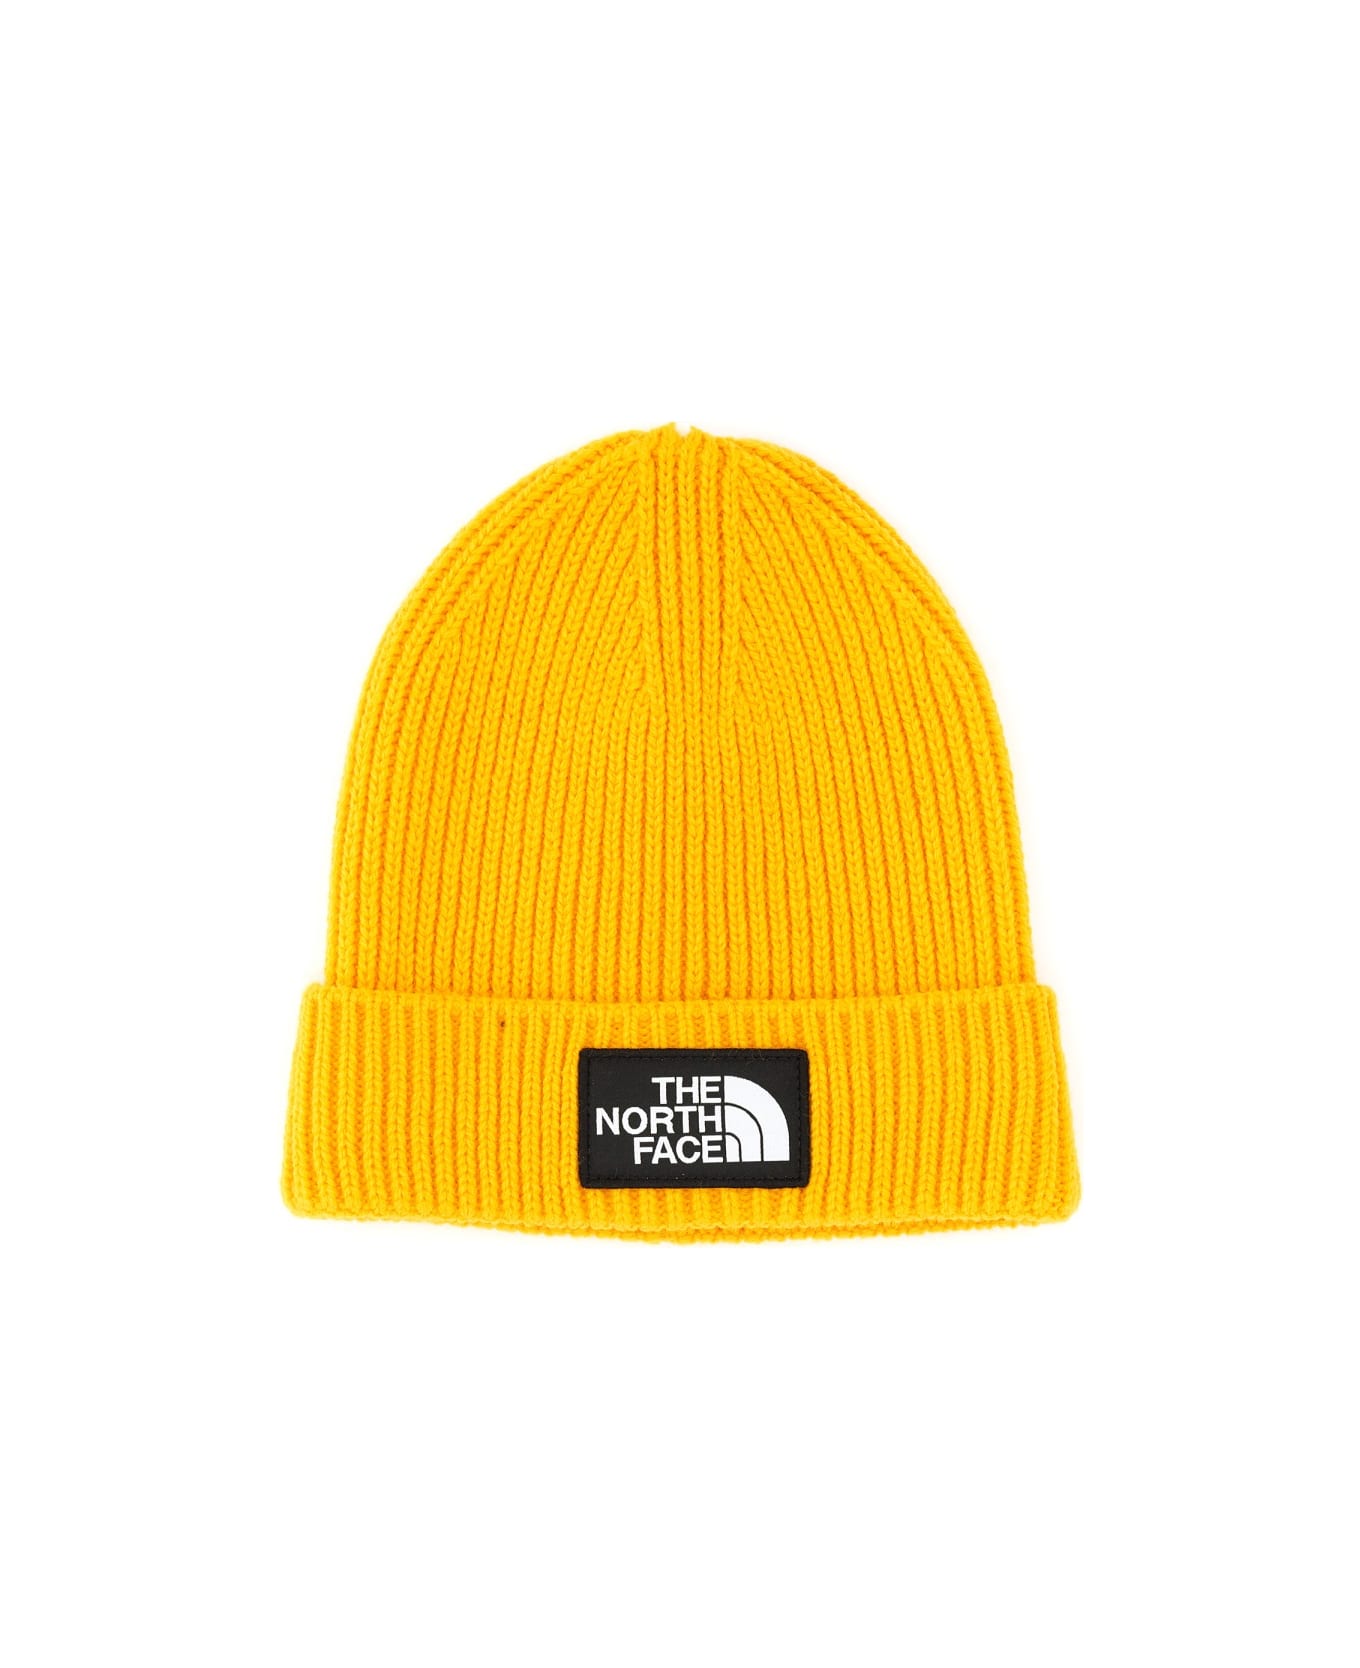 The North Face Beanie Hat - YELLOW